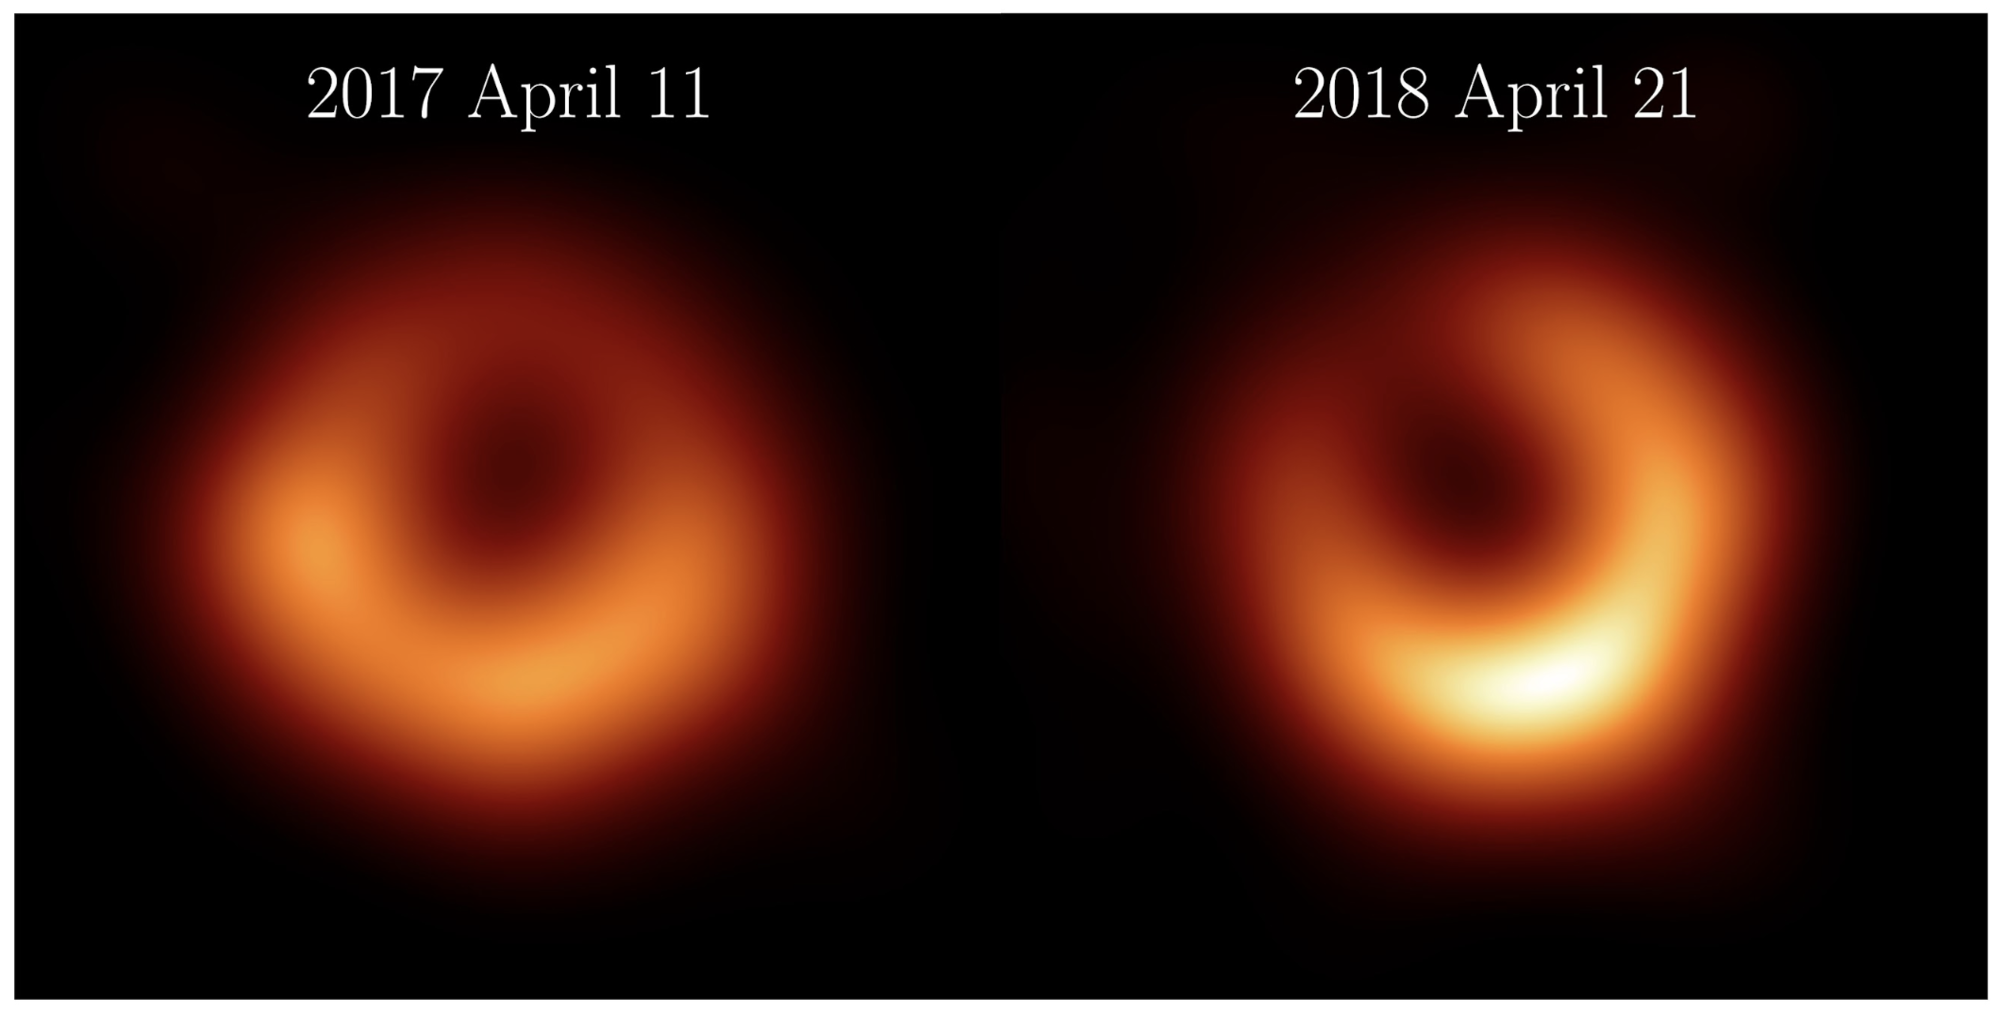 Side-by-side comparisons with M87* in 2017 and 2018 show how the bright spot in the ring of matter around the black hole has shifted.